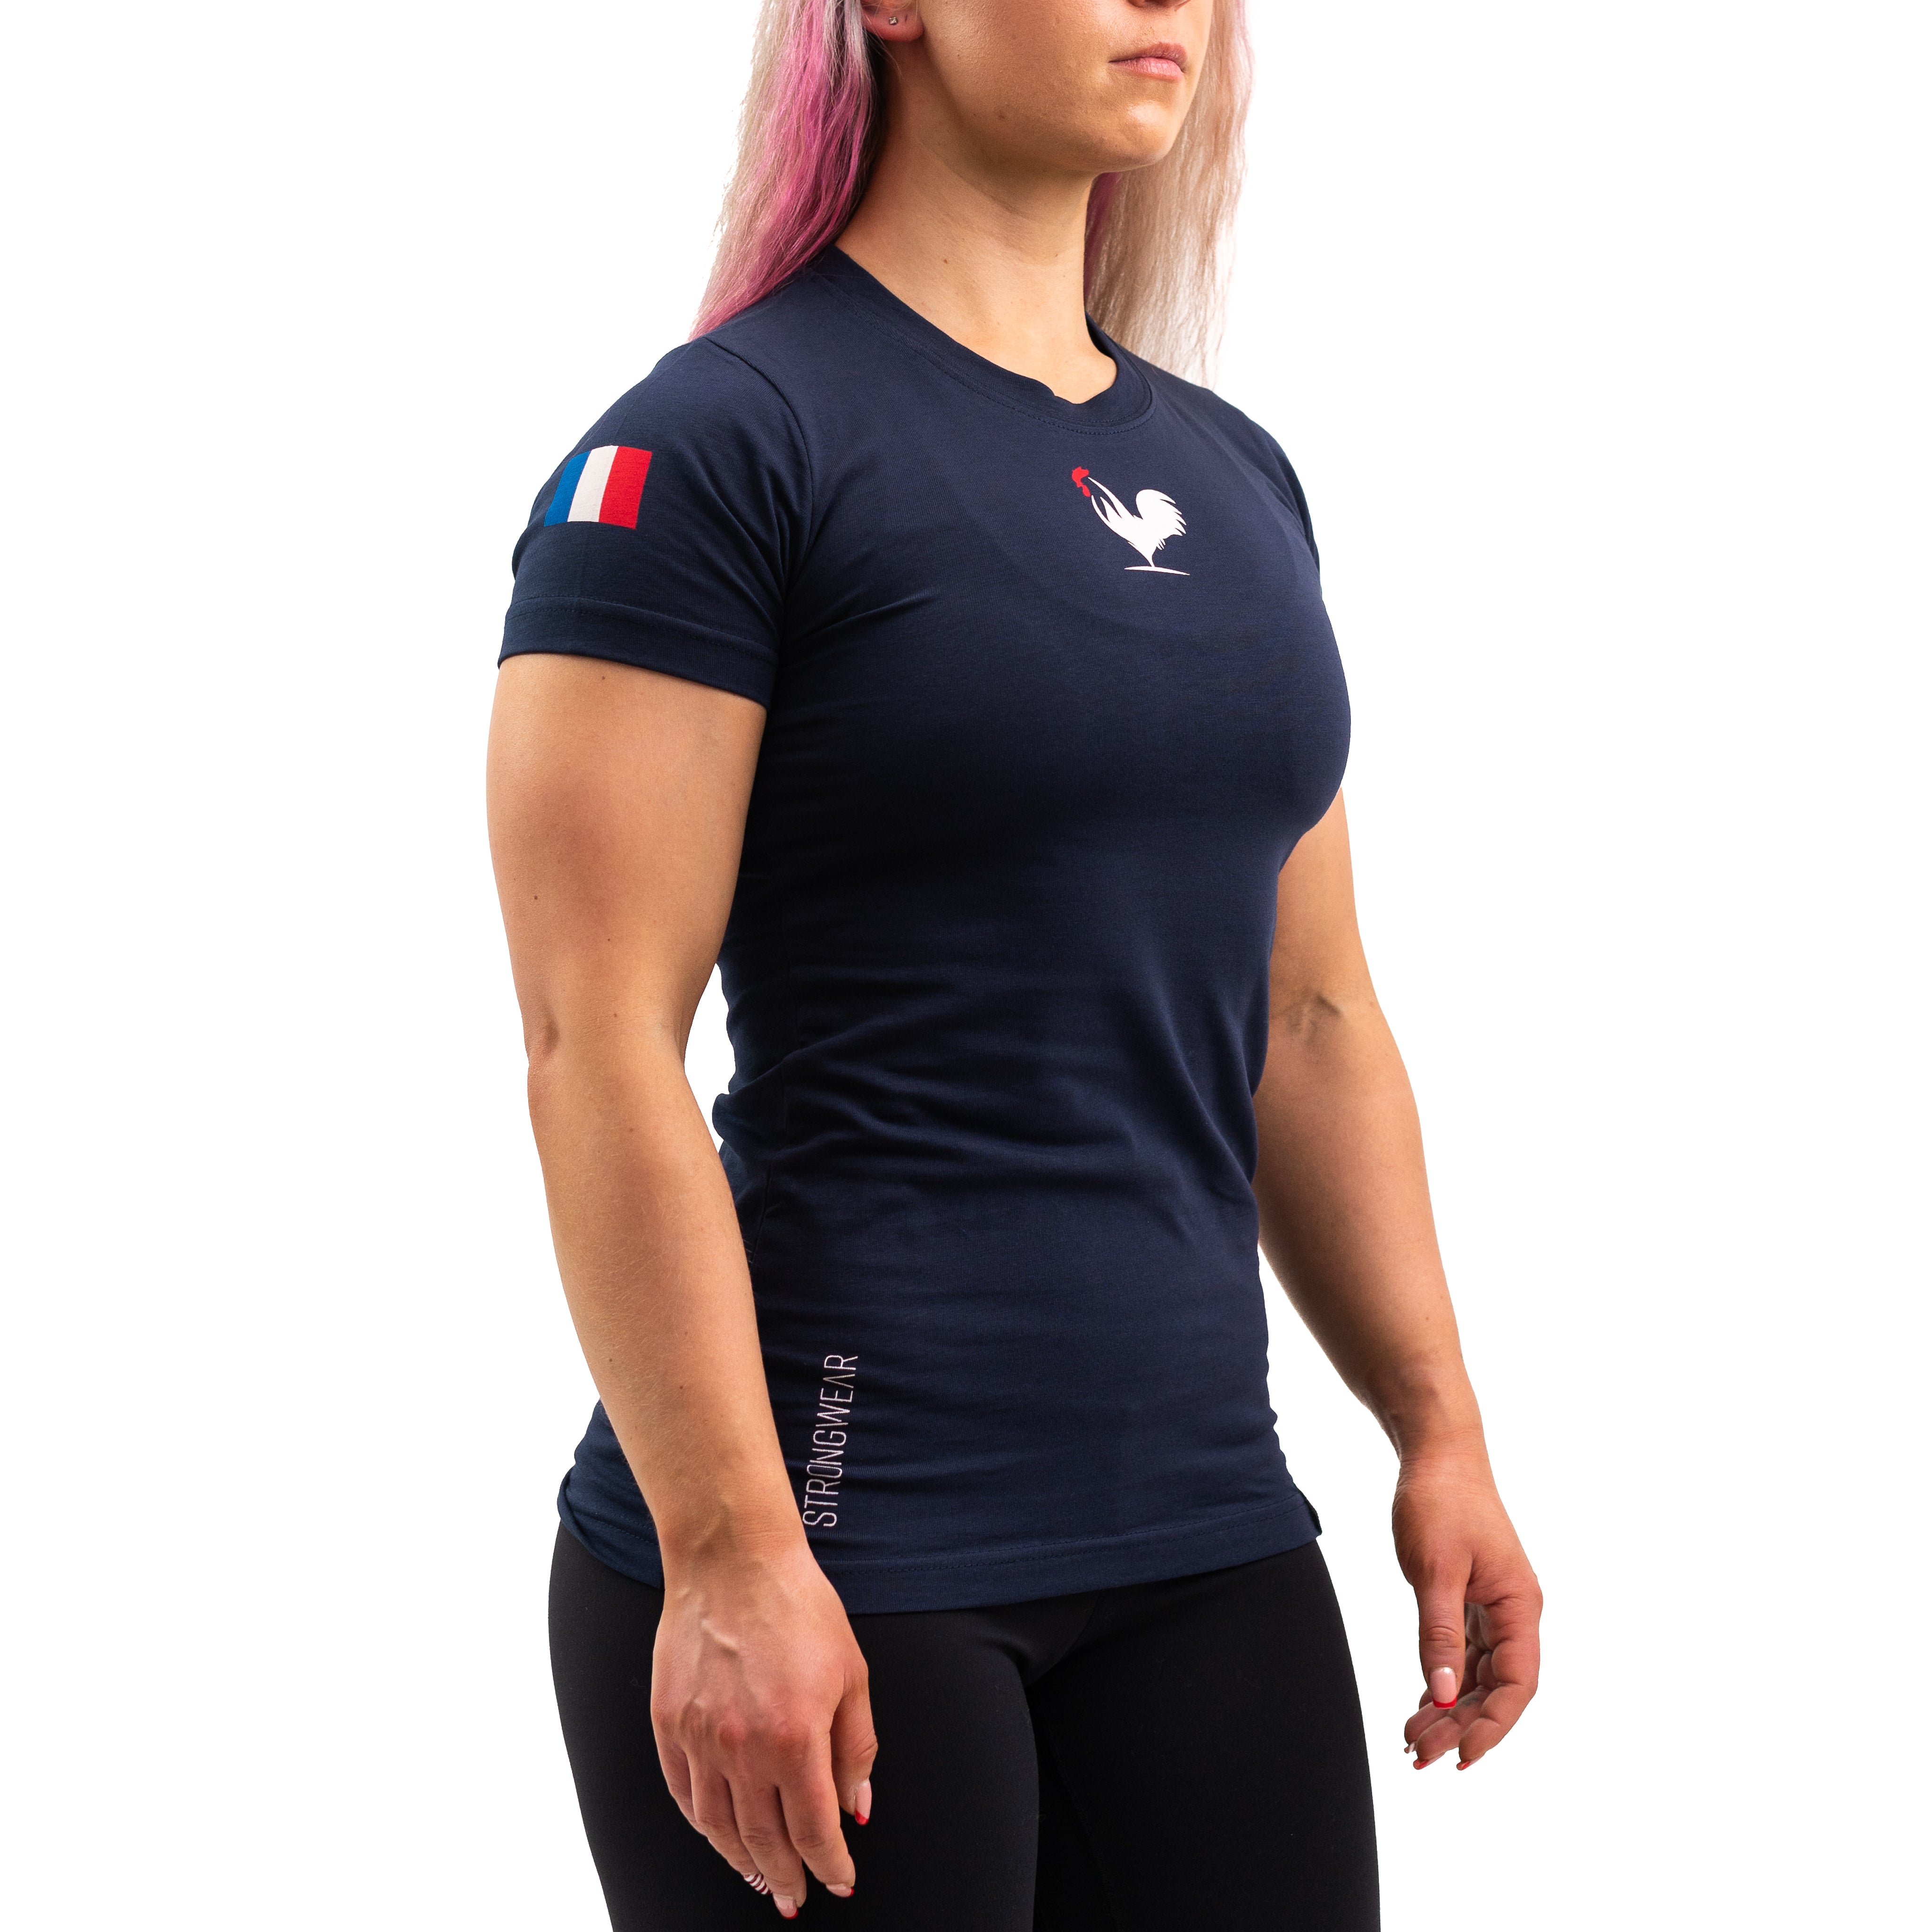 The A7 France Meet Shirt honours the pride and power of one of the strongest countries in Europe and one that you can bring to the platform for comp day or just in training! The A7 France Meet Shirt is an essential in any IPF approved kit. This A7 France Meet Shirt is approved for use in the IPF, EPF and most major federations. 